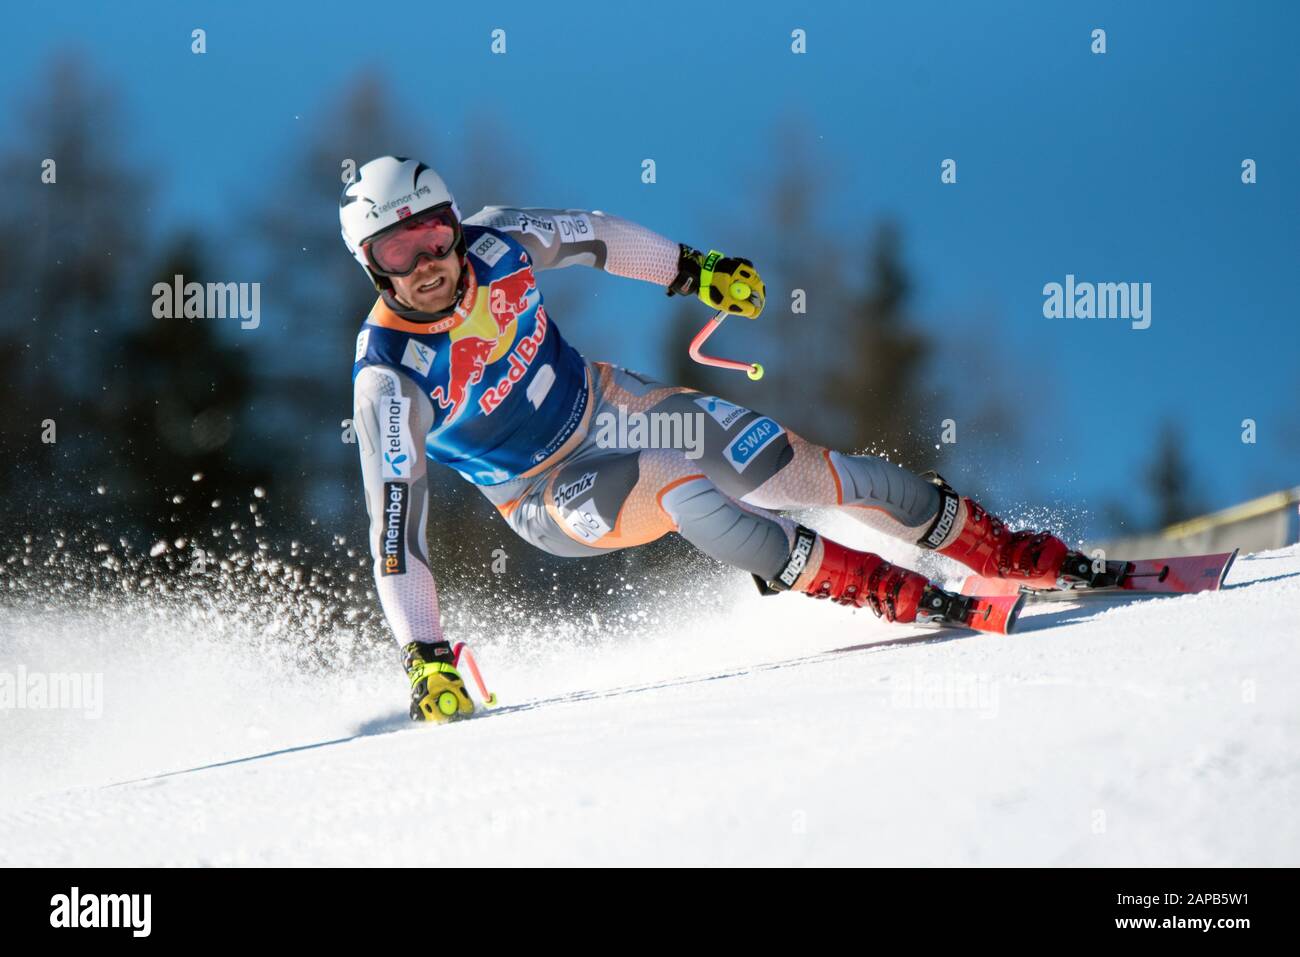 Aleksander Aamodt Kilde of Norway at the Ski Alpin: 80. Hahnenkamm Race 2020 - Audi FIS Alpine Ski World Cup - Men's Downhill Training at the Streif on January 22, 2020 in Kitzbuehel, AUSTRIA. (Photo by Horst Ettensberger/ESPA-Images) Stock Photo